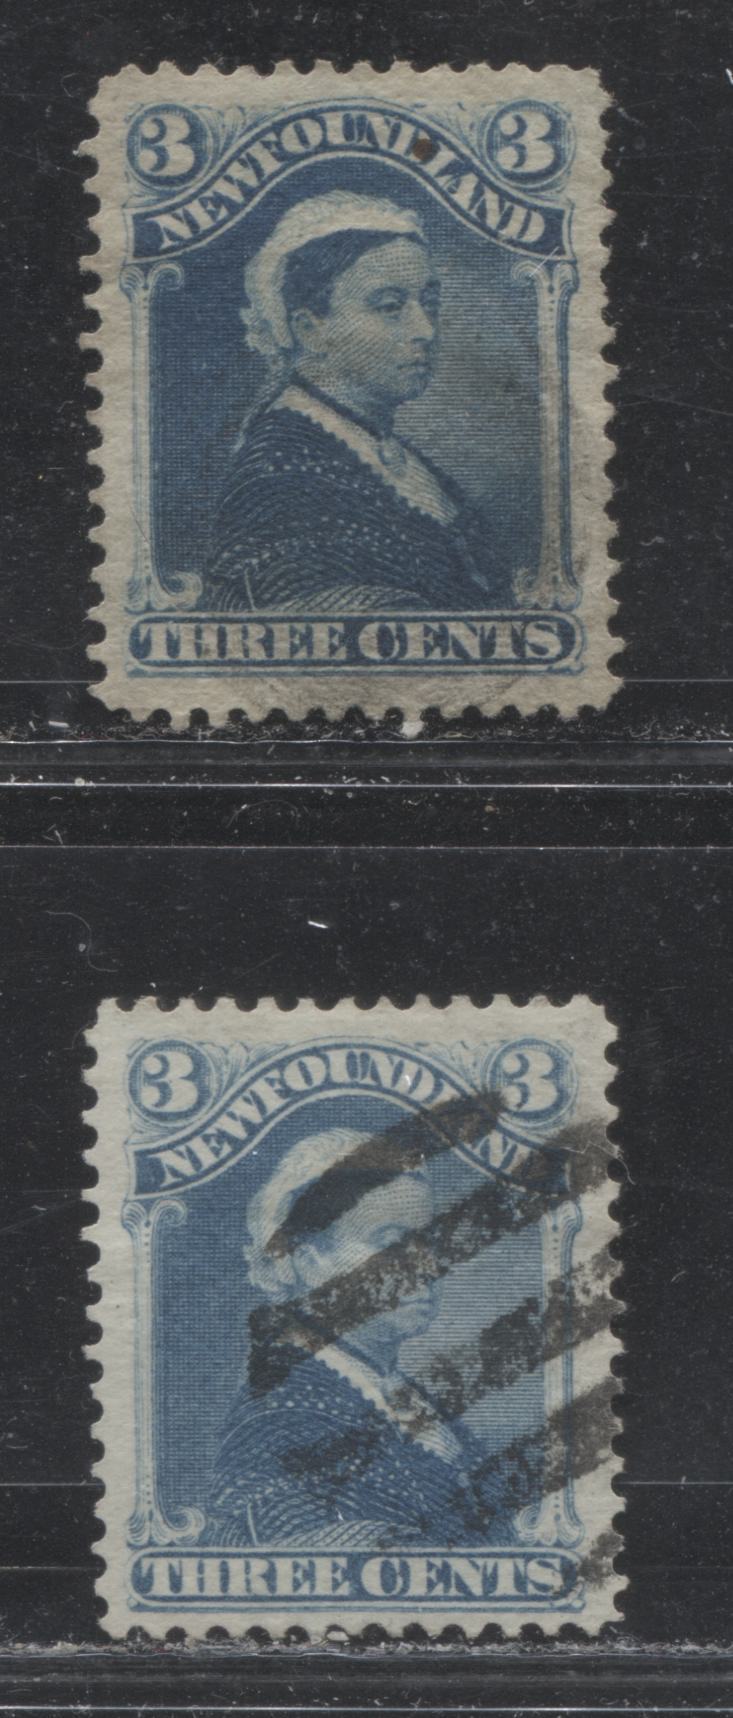 Lot 63A Newfoundland #49a & 49 3c Blue Queen Victoria, 1896 Third Cents Issue, 2 Very Fine Used Singles On Horizontal Wove Papers, Perfs 12 x 12.1 & 12.25 x 12.2